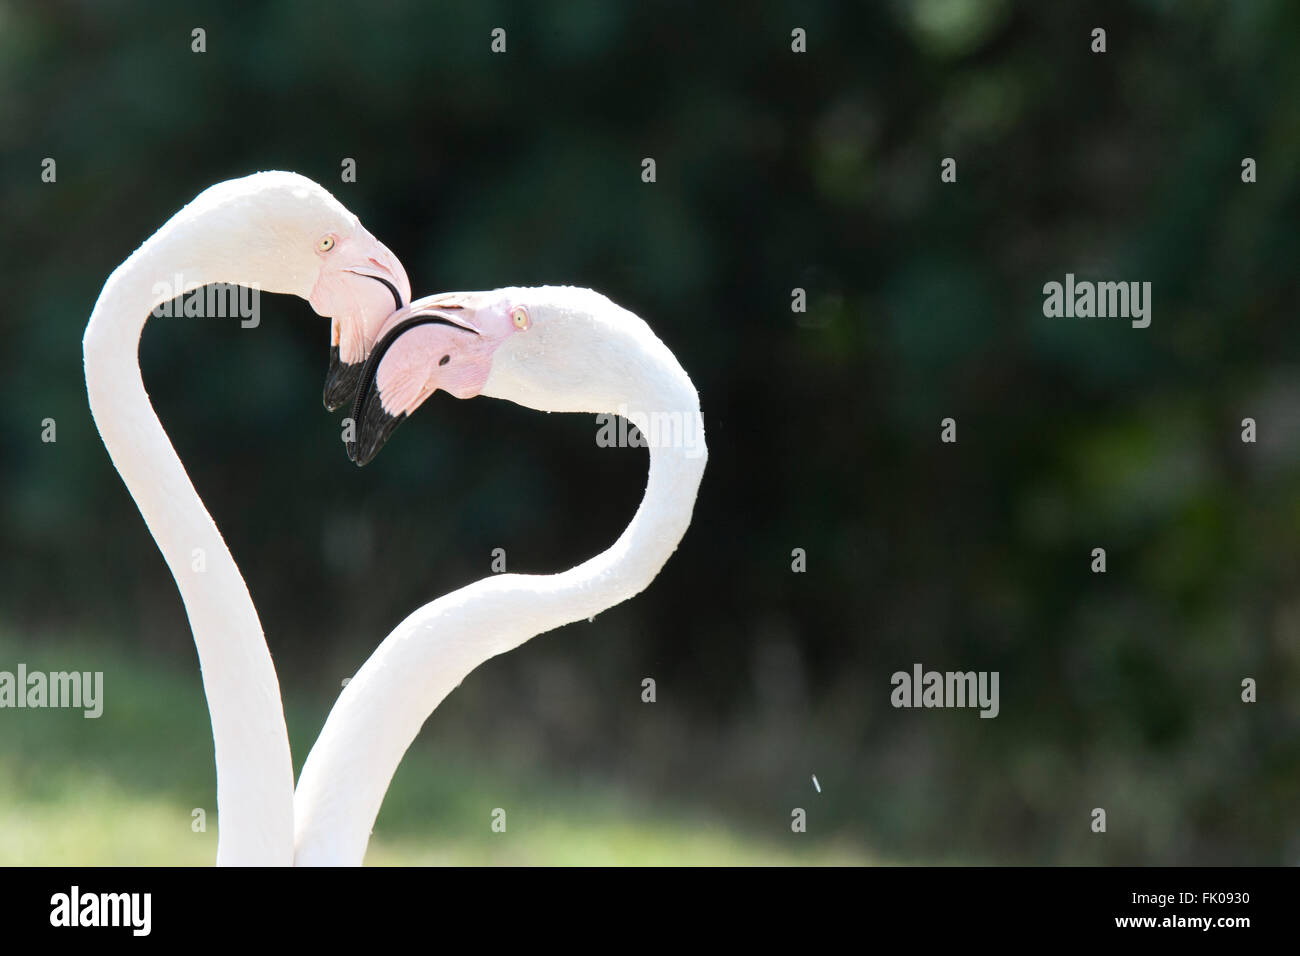 Welney Wetlands Trust, Norfolk, UK. A pair of flamingoes form a heart-shape with their necks. Stock Photo